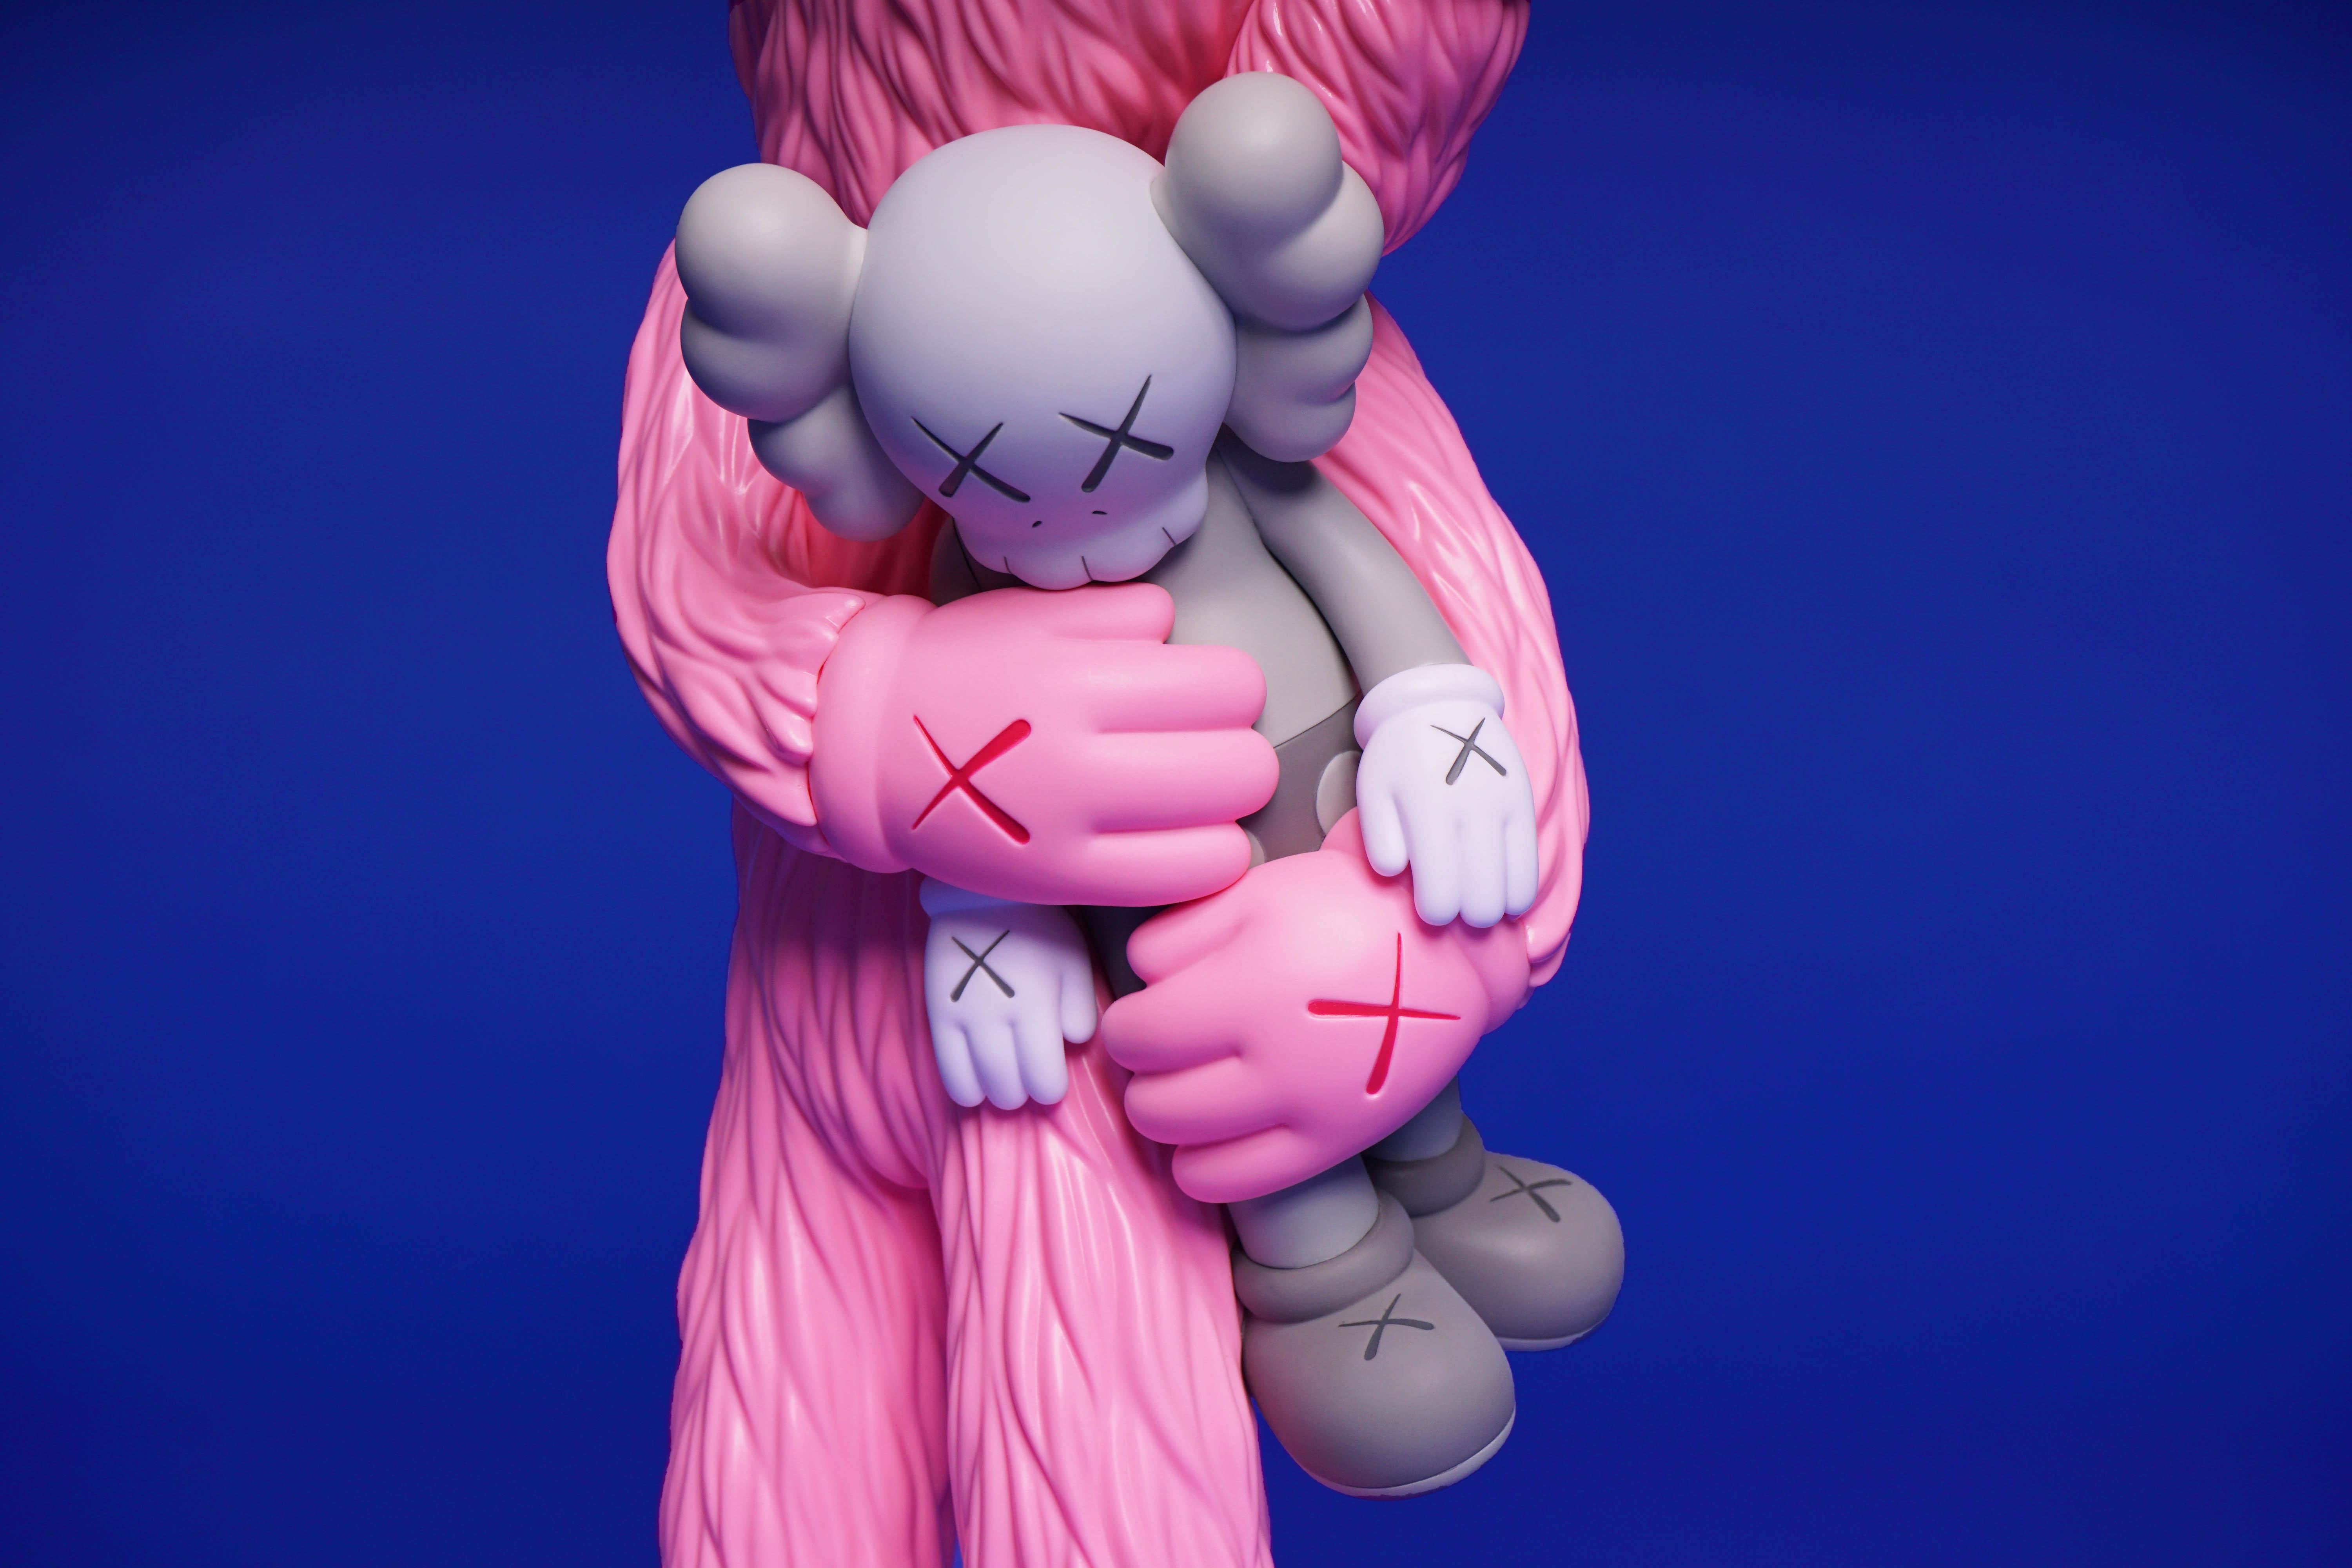 The ‘KAWS TAKE’ is a vinyl millennial pink art toy made in collaboration with Medicom Toy by KAWS. Recently acquired directly from the KAWSONE portal, the instantly sold out vinyl art toy comes with all original boxed packaging in perfect new